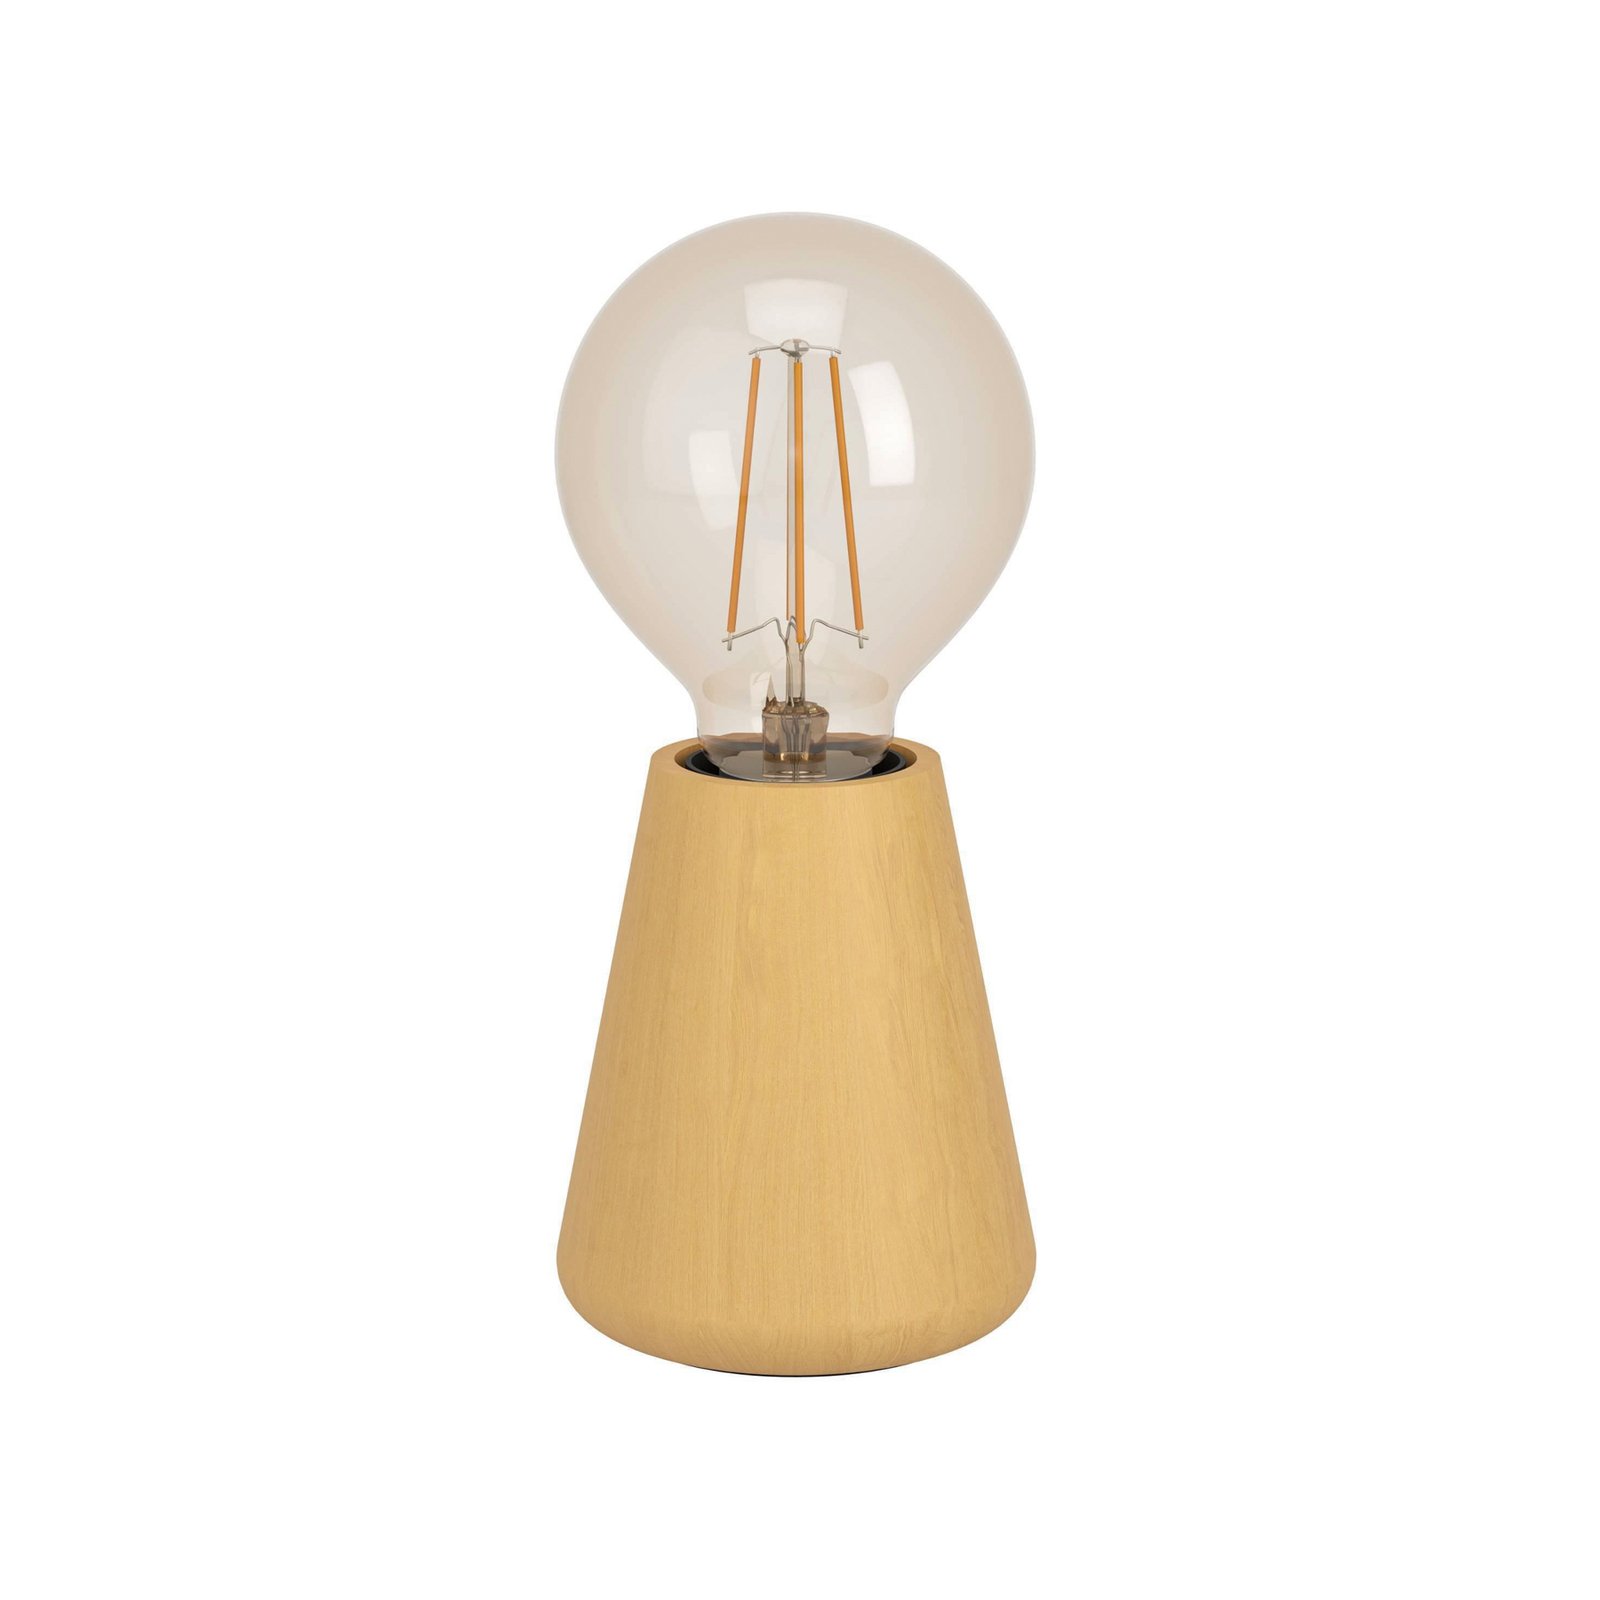 Asby tafellamp, licht hout, hoogte 10 cm, hout